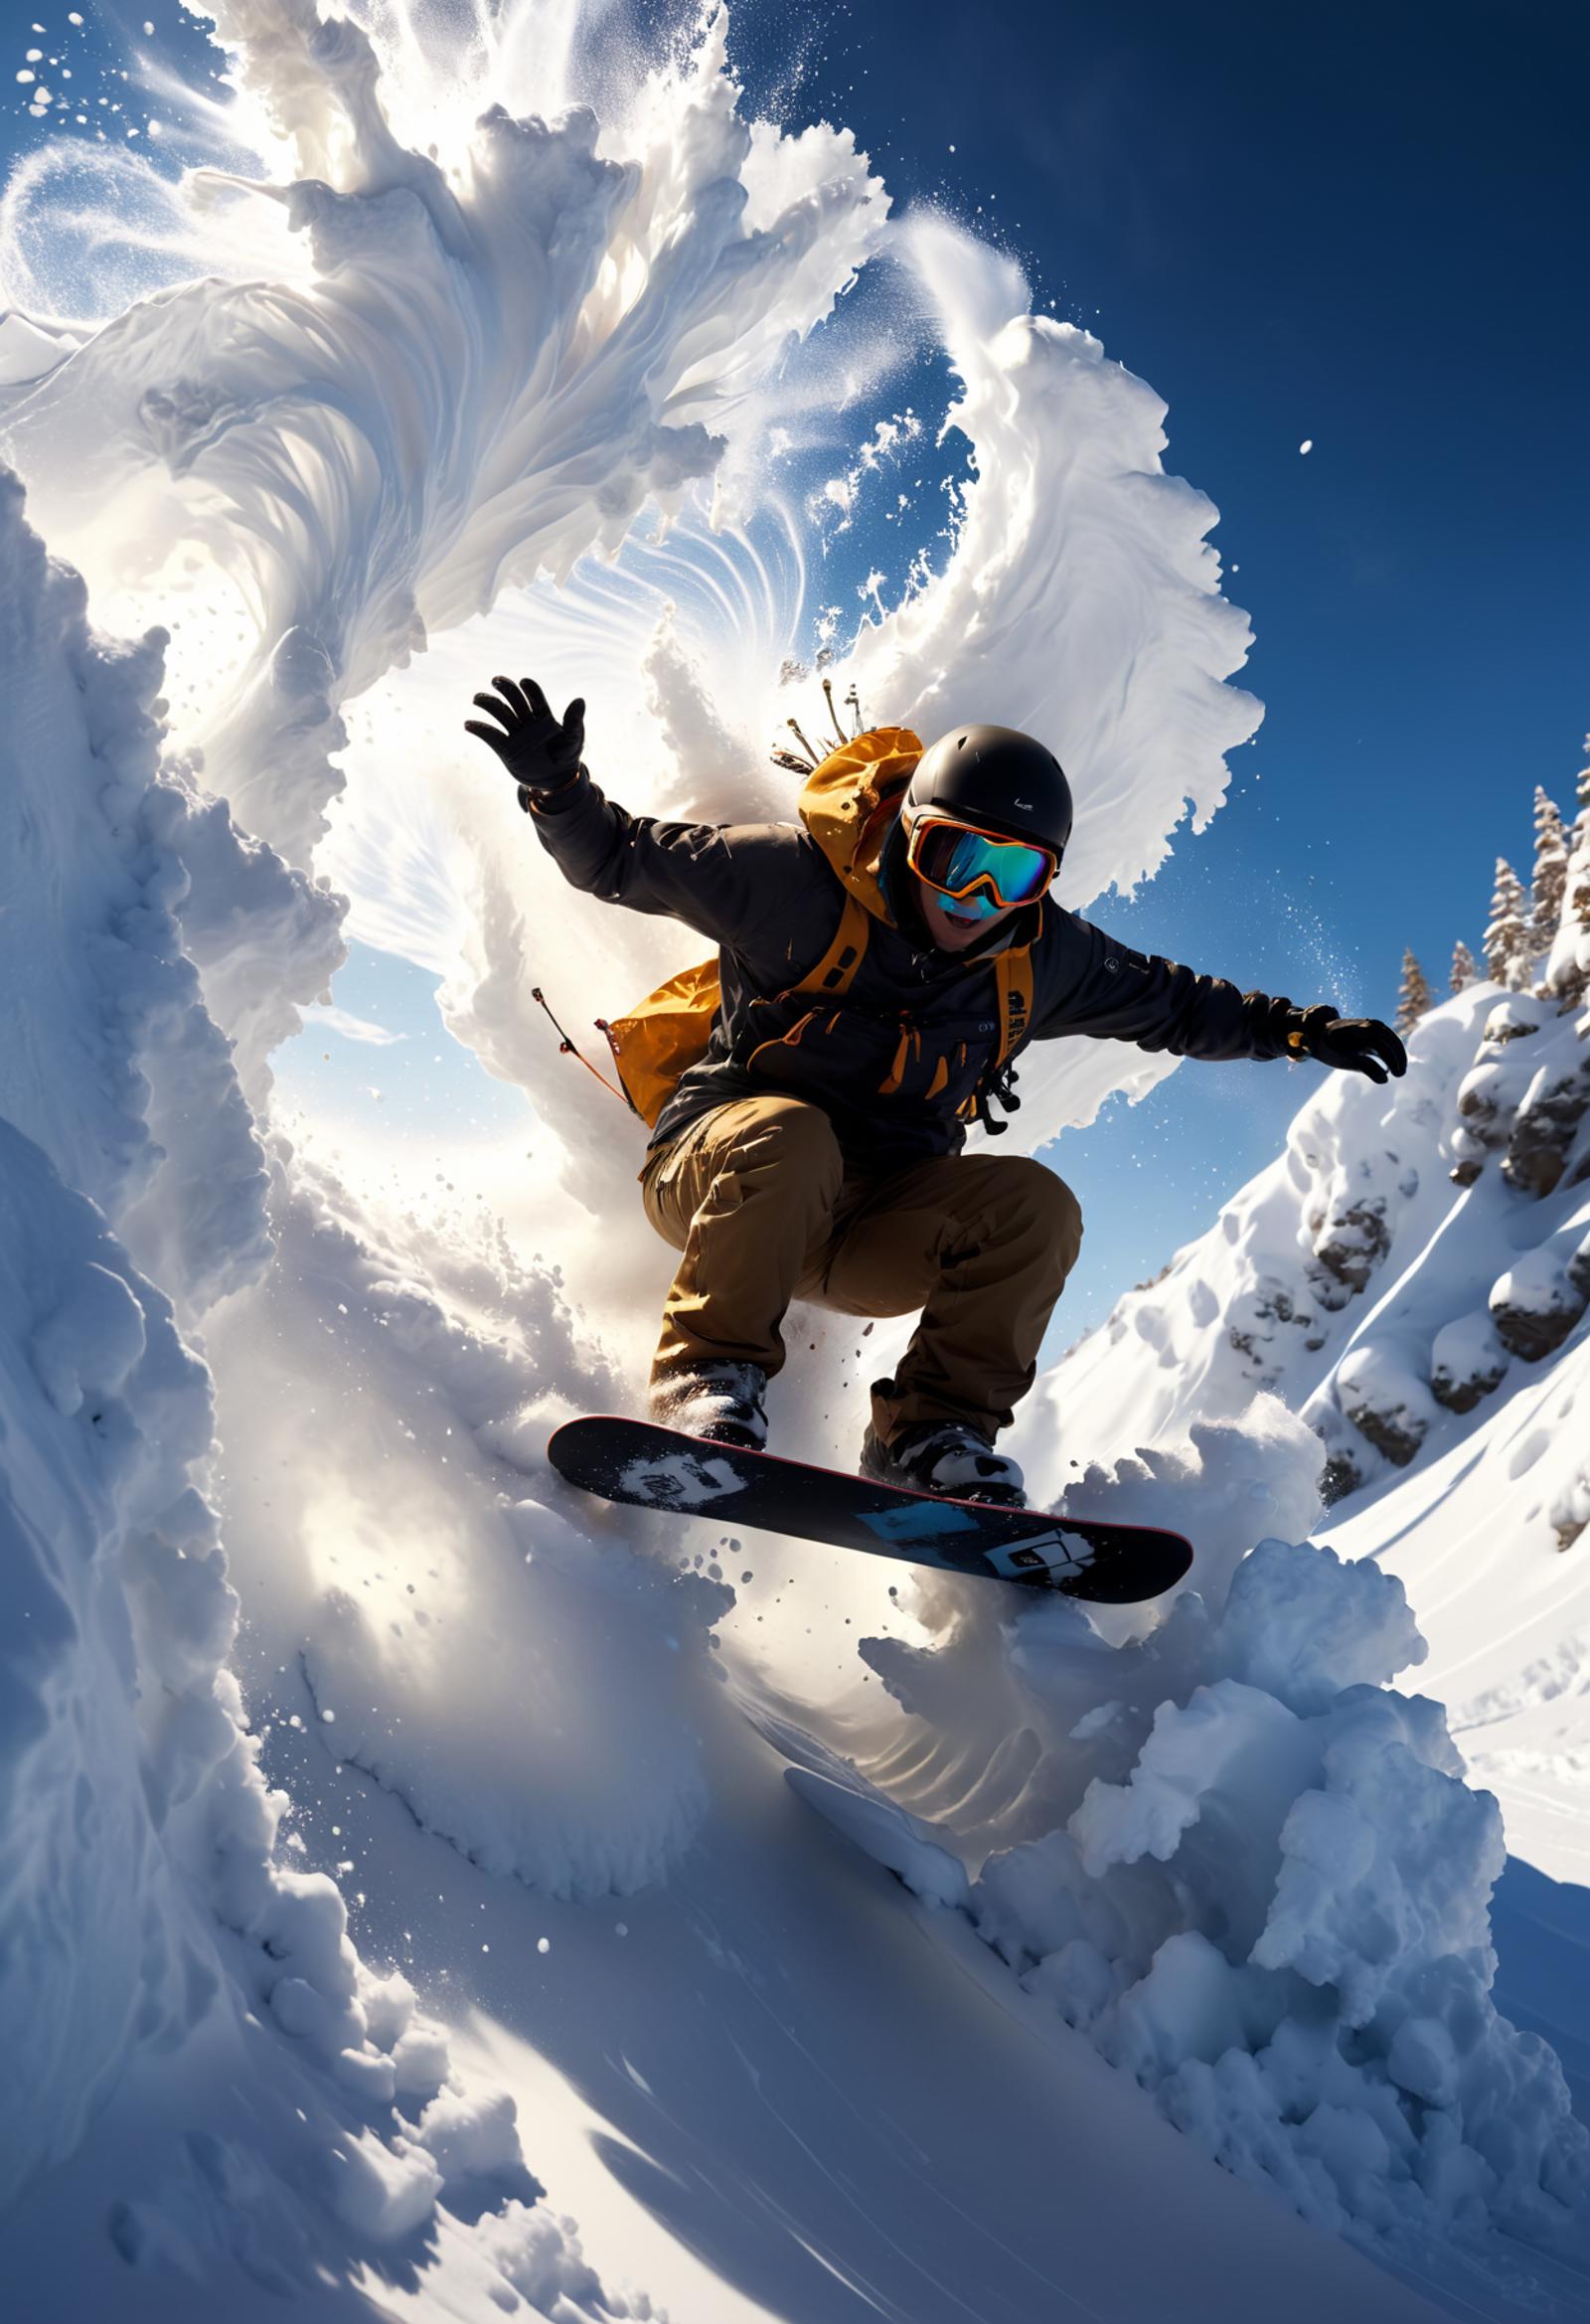 A snowboarder in a yellow jacket and goggles flying through the air while snowboarding down a mountain.